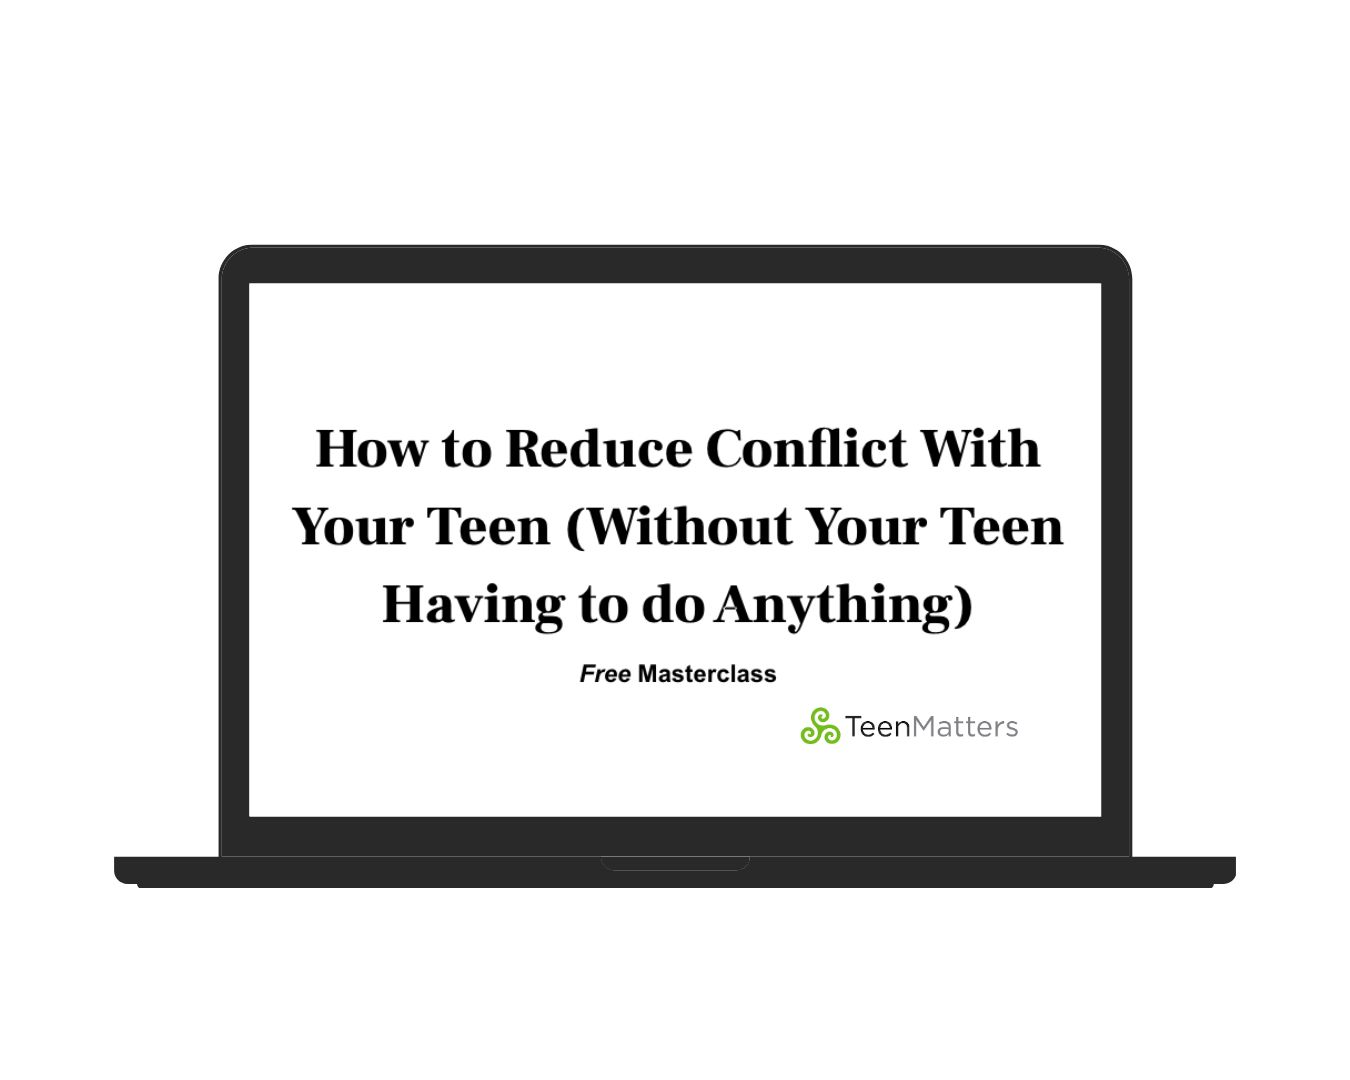 Online masterclass for parents how to reduce conflict with your teen 